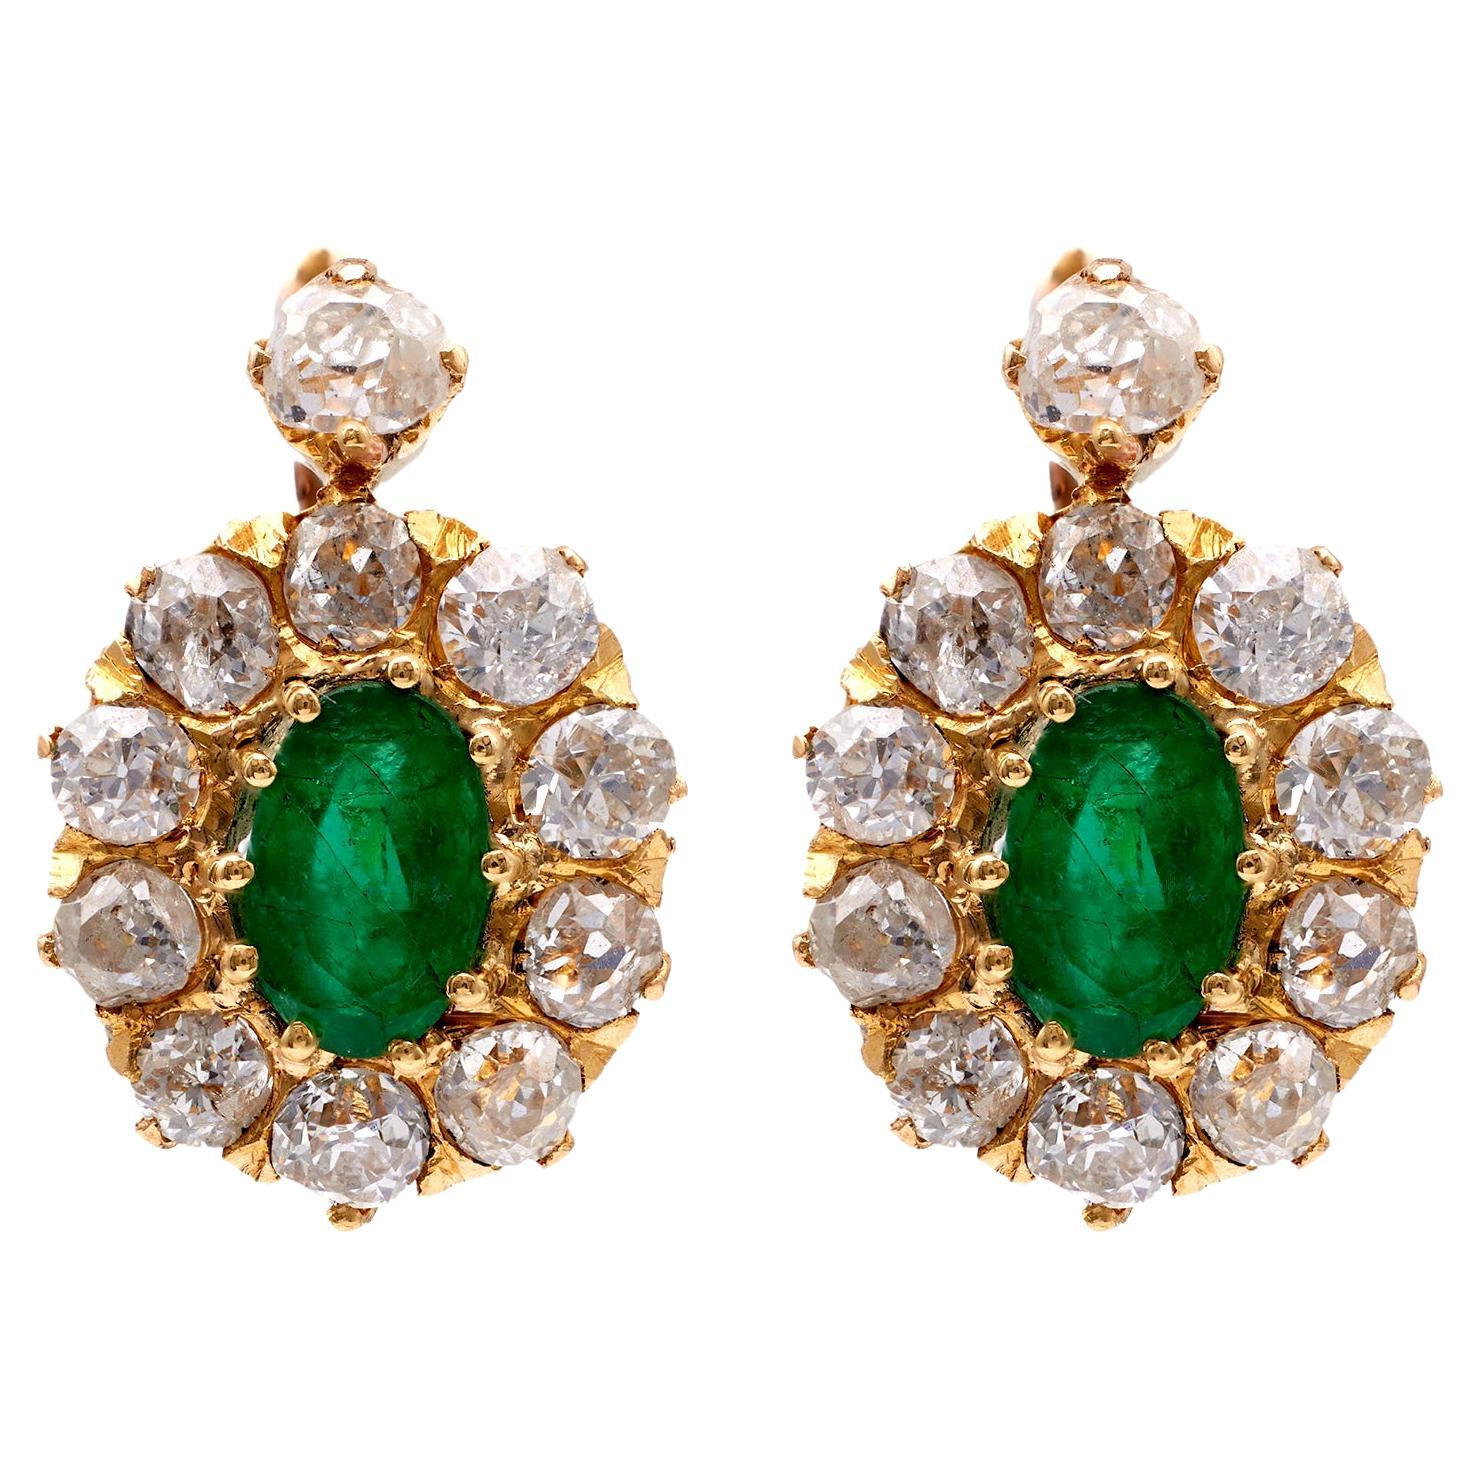 Pair of Late Victorian Emerald Diamond 18k Yellow Gold Cluster Earrings